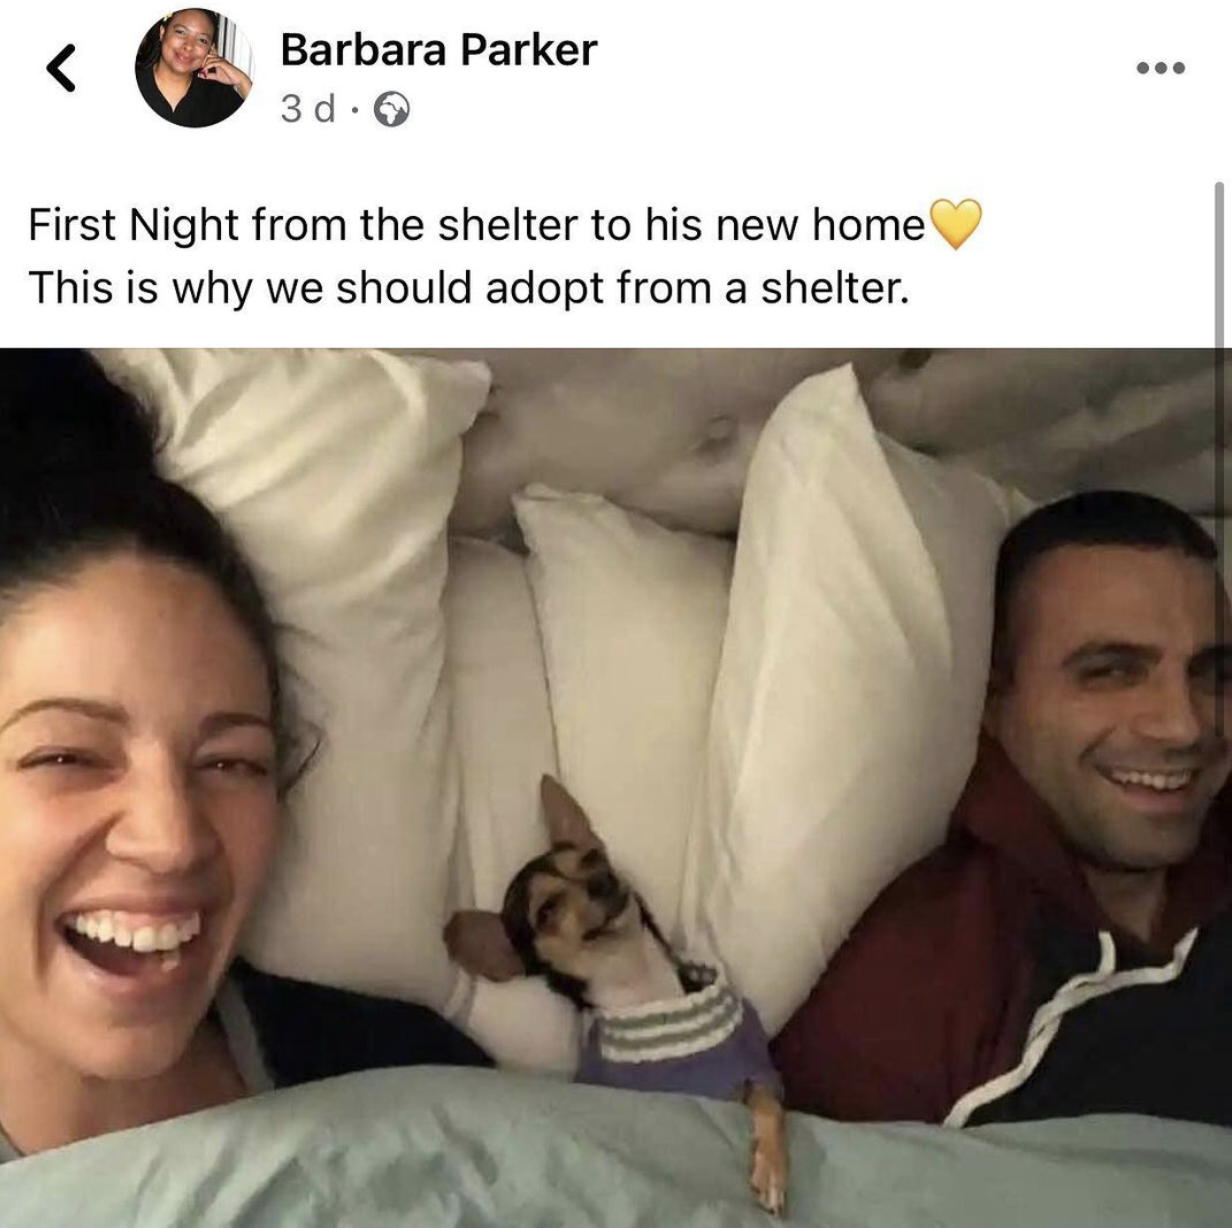 this is too wholesome look how happy that dog is!!!